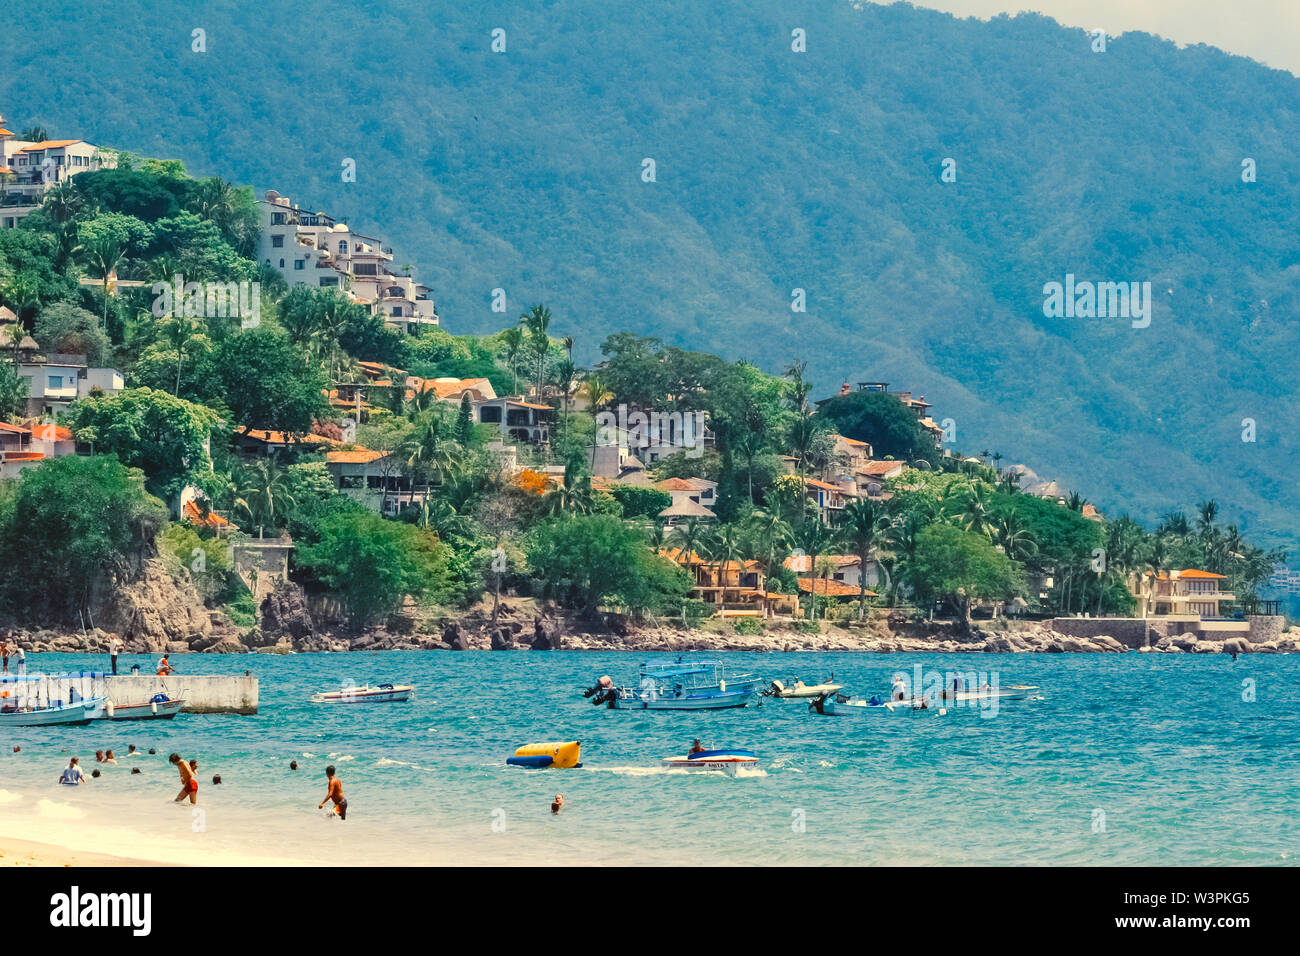 Puerto Vallarta / Mexico - Jun 26.2006: View on the coast beach and turquoise color sea with people swimming and relaxing on the sand. Sunny. Stock Photo